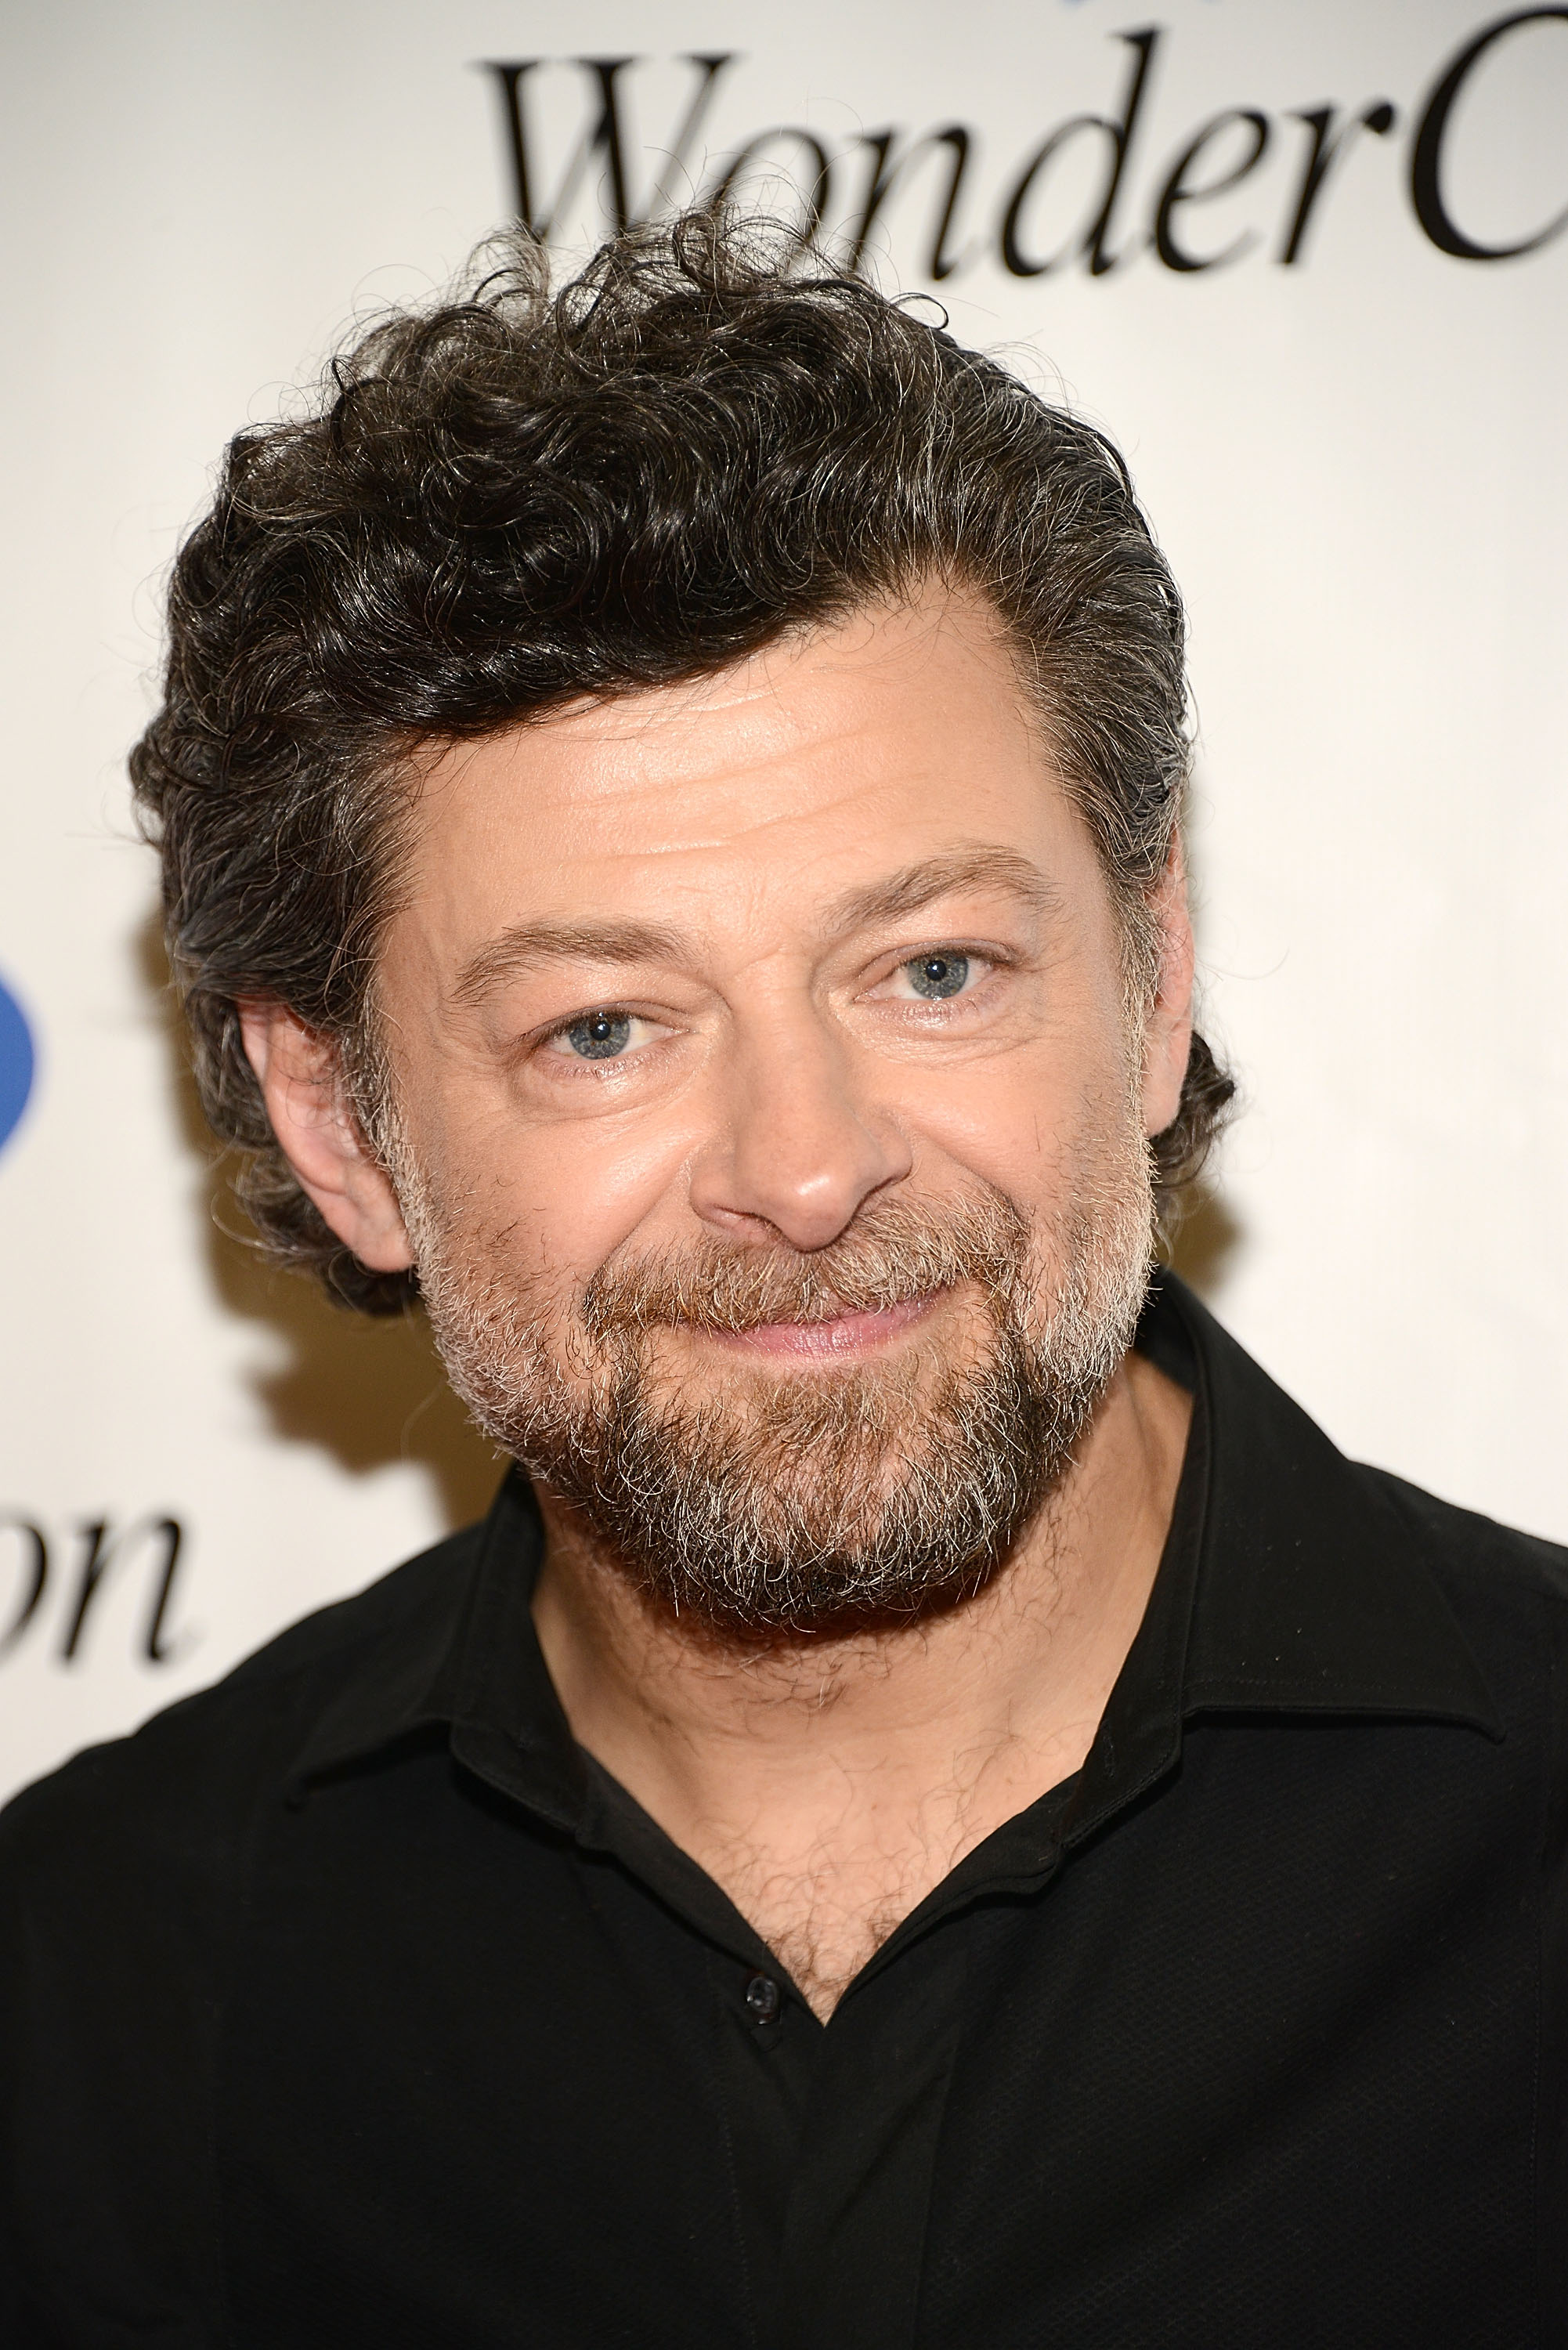 Andy Serkis
                              Best known for his role as Gollum in the Lord of the Rings trilogy, Serkis was most recently the Second unit director in the Hobbit trilogy.